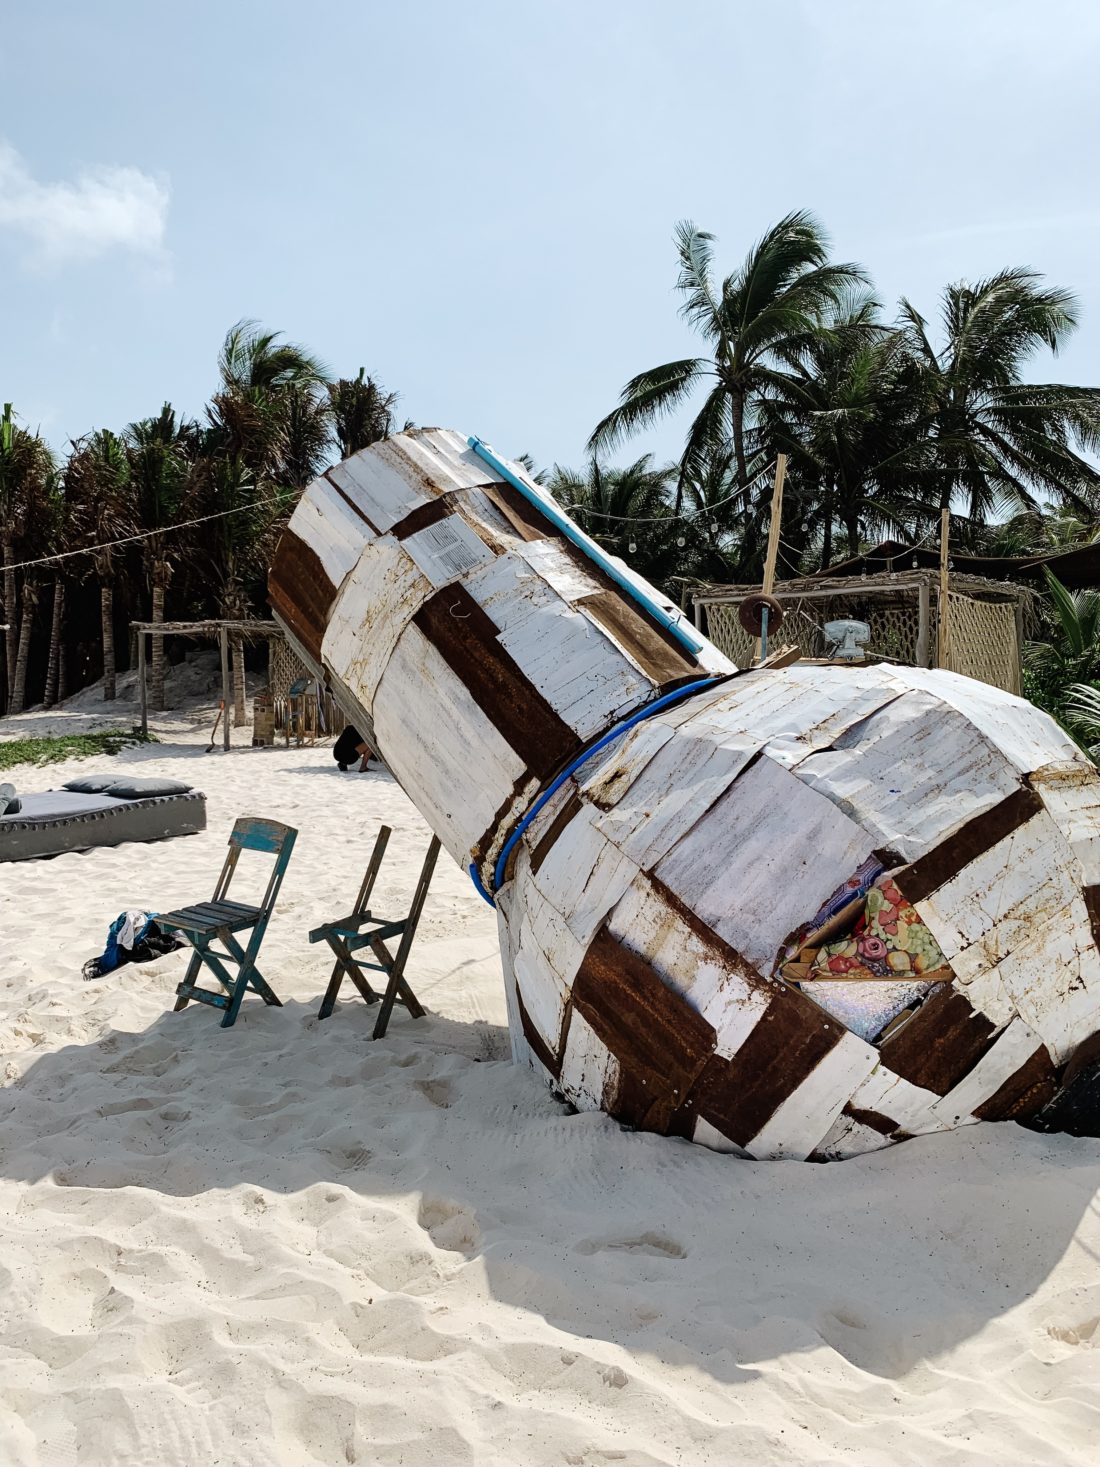 A wooden sculpture on the beach in Tulum Mexico